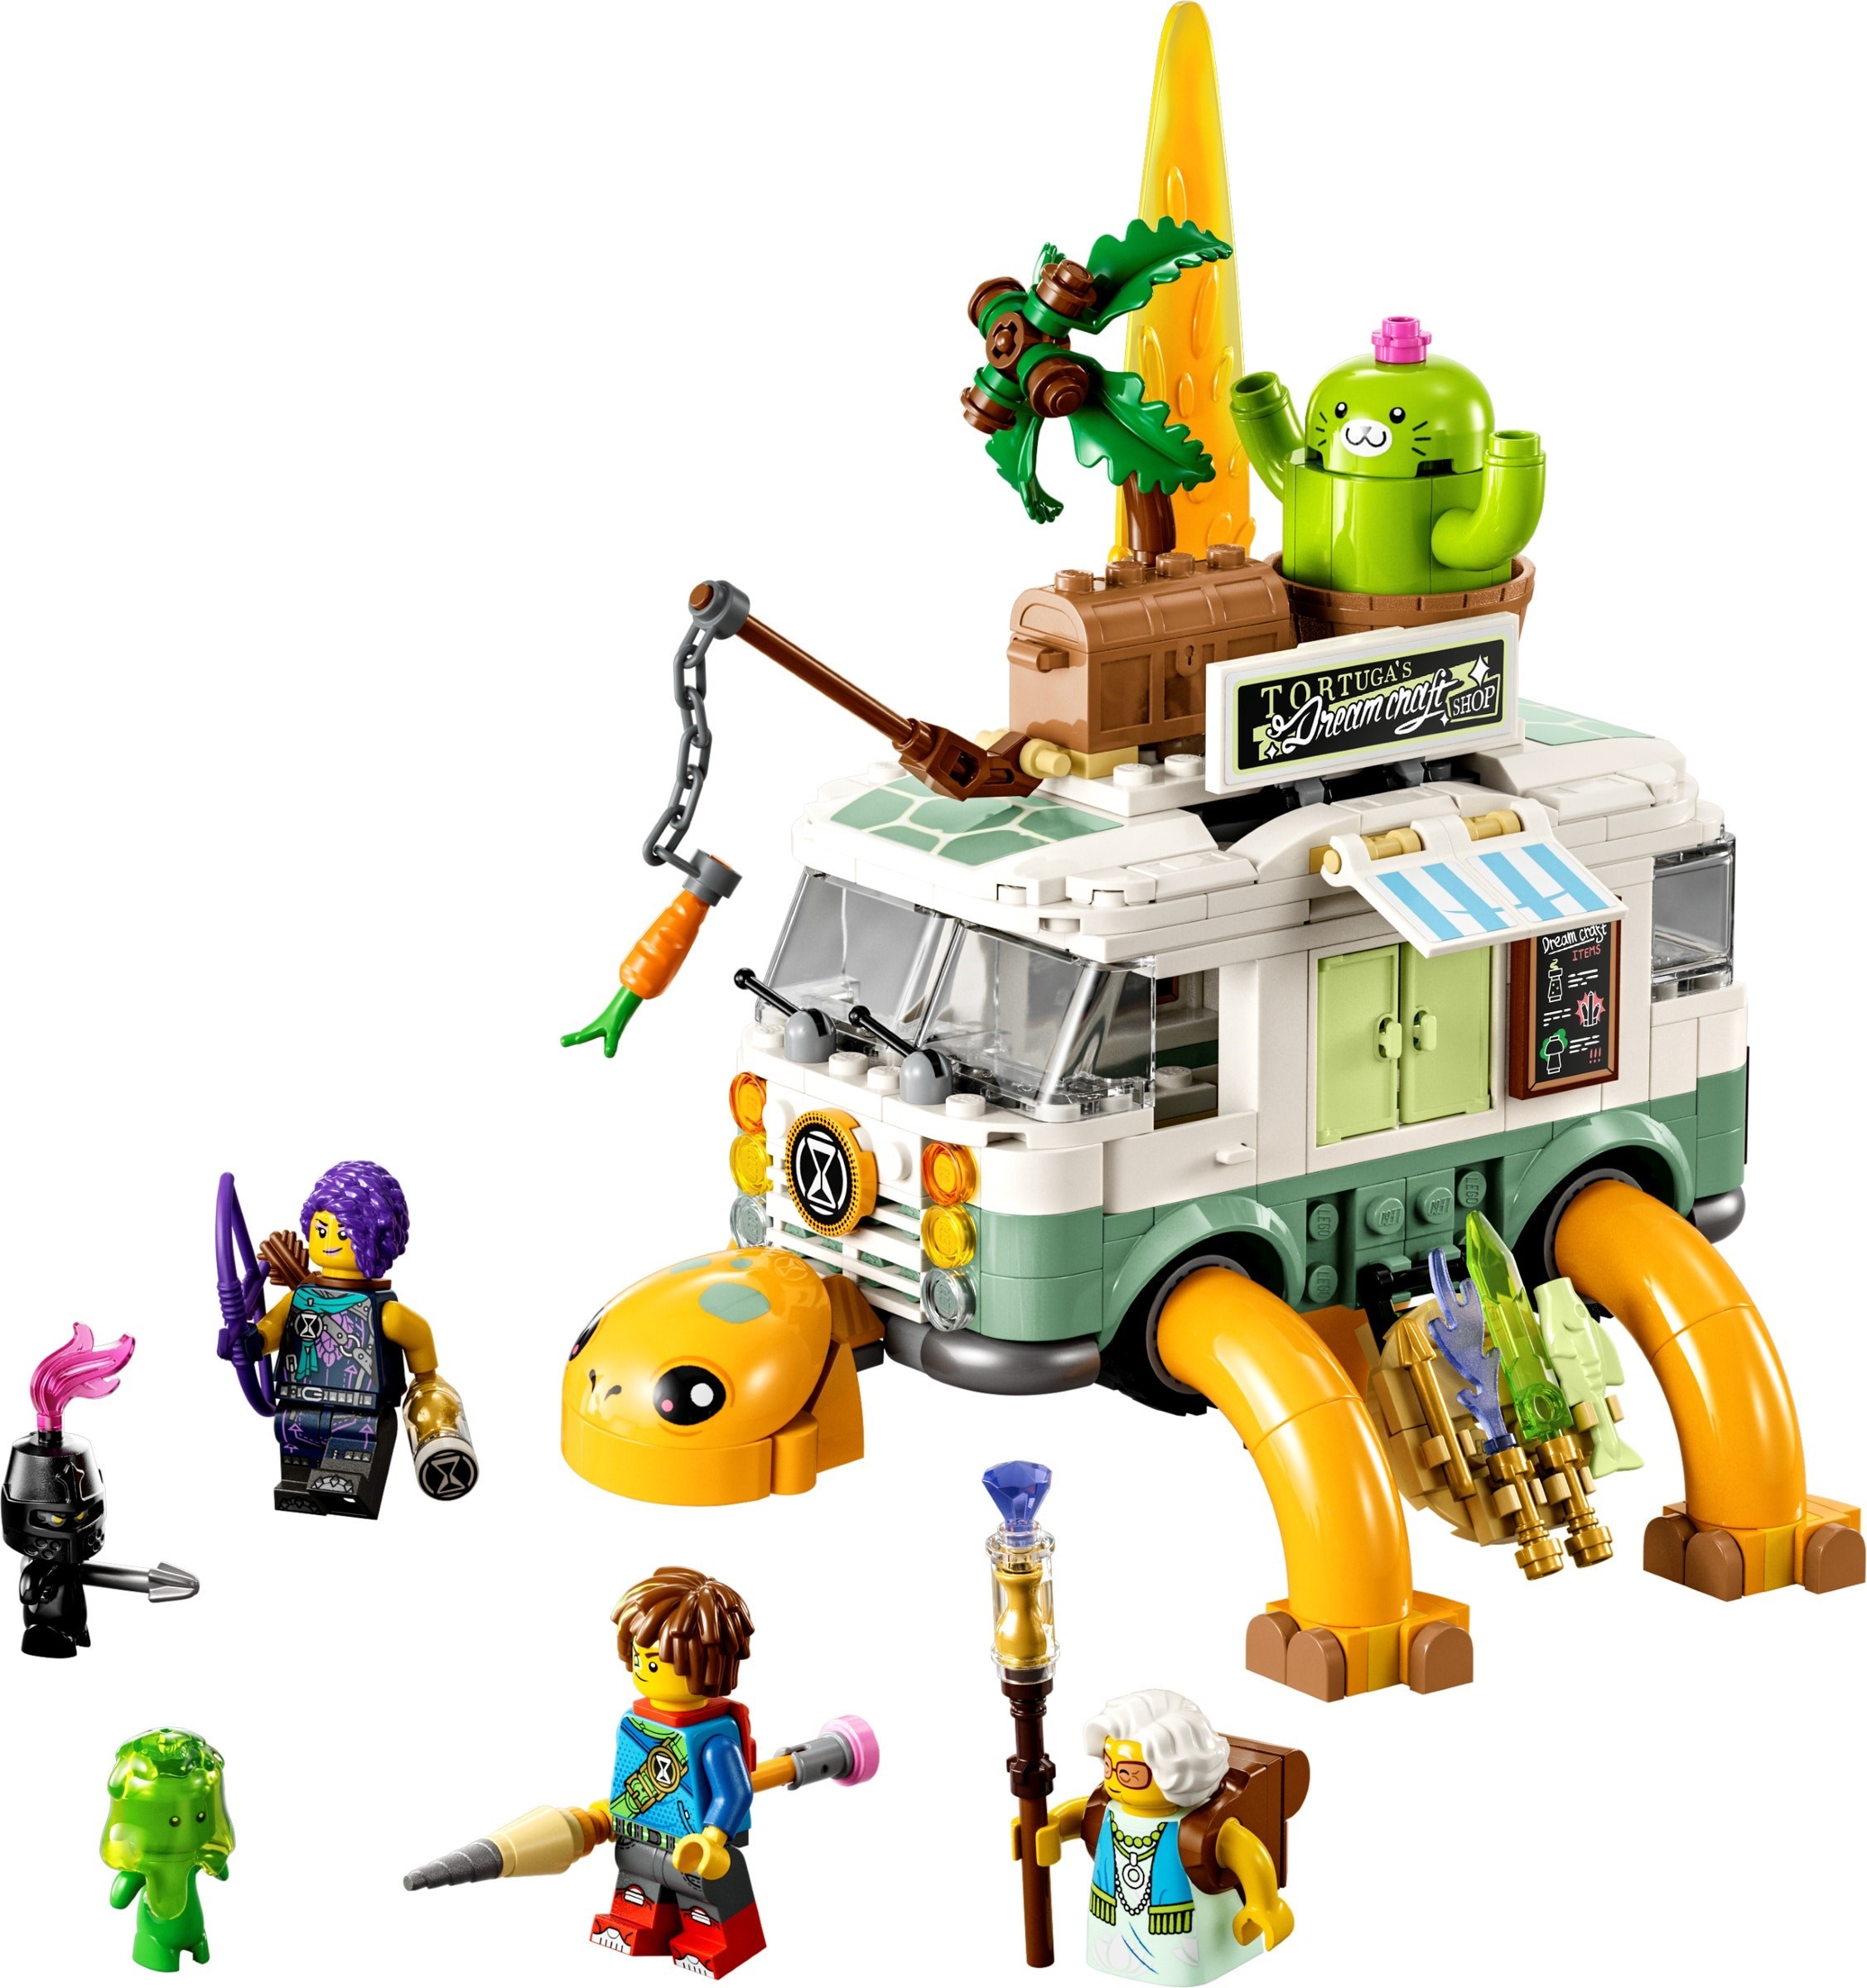 Every LEGO Dreamzzz Set: Early August 2023 Megareview! 